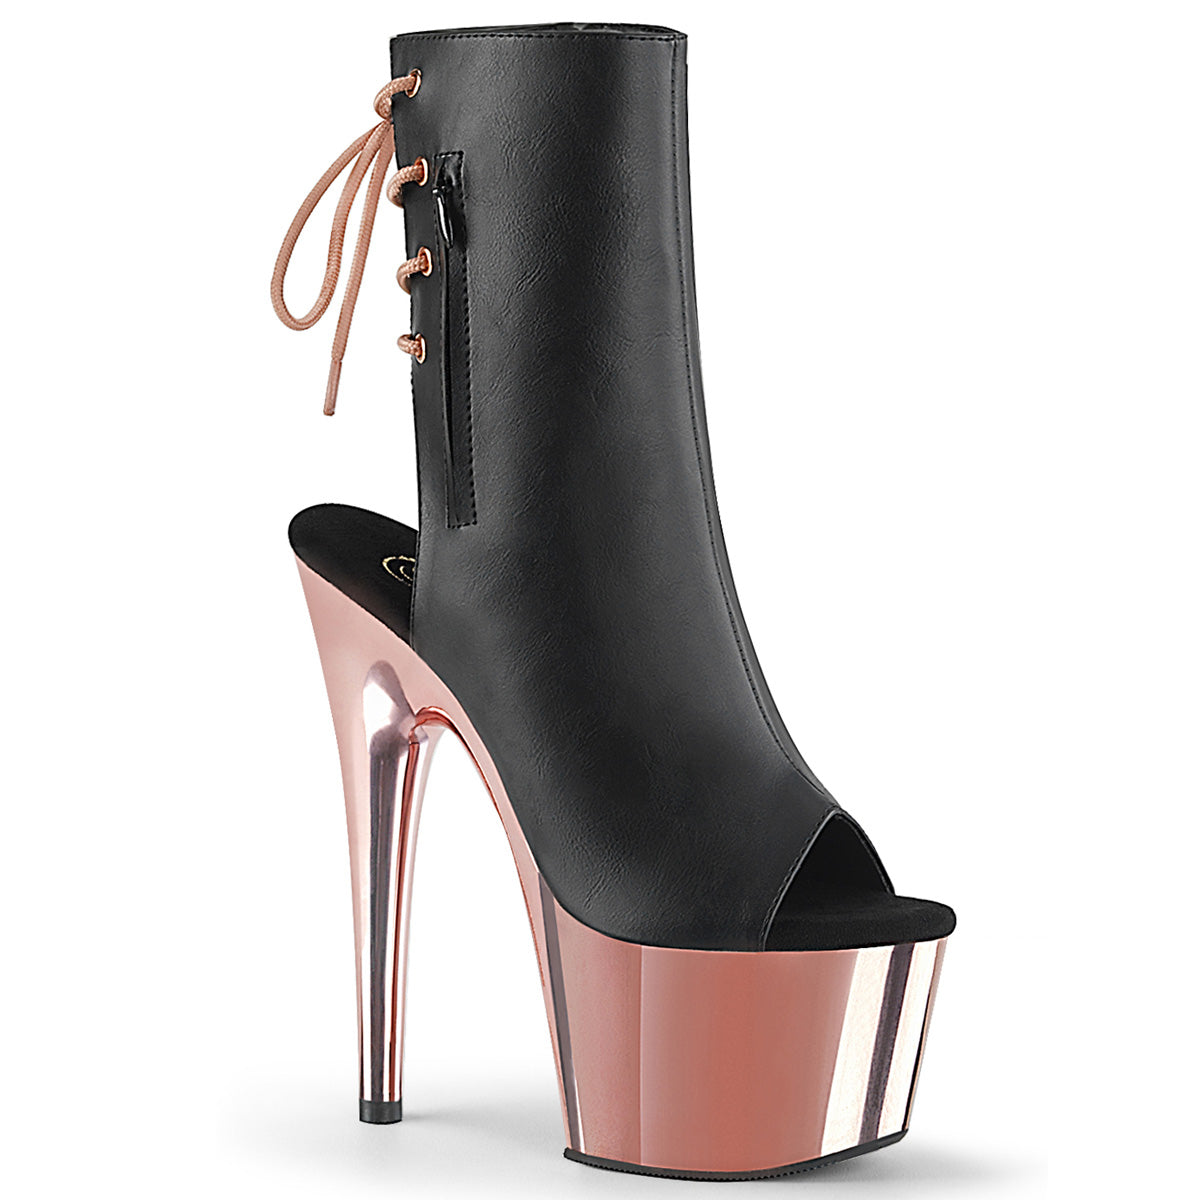 ADORE-1018 Black/Rose Gold Ankle Boot